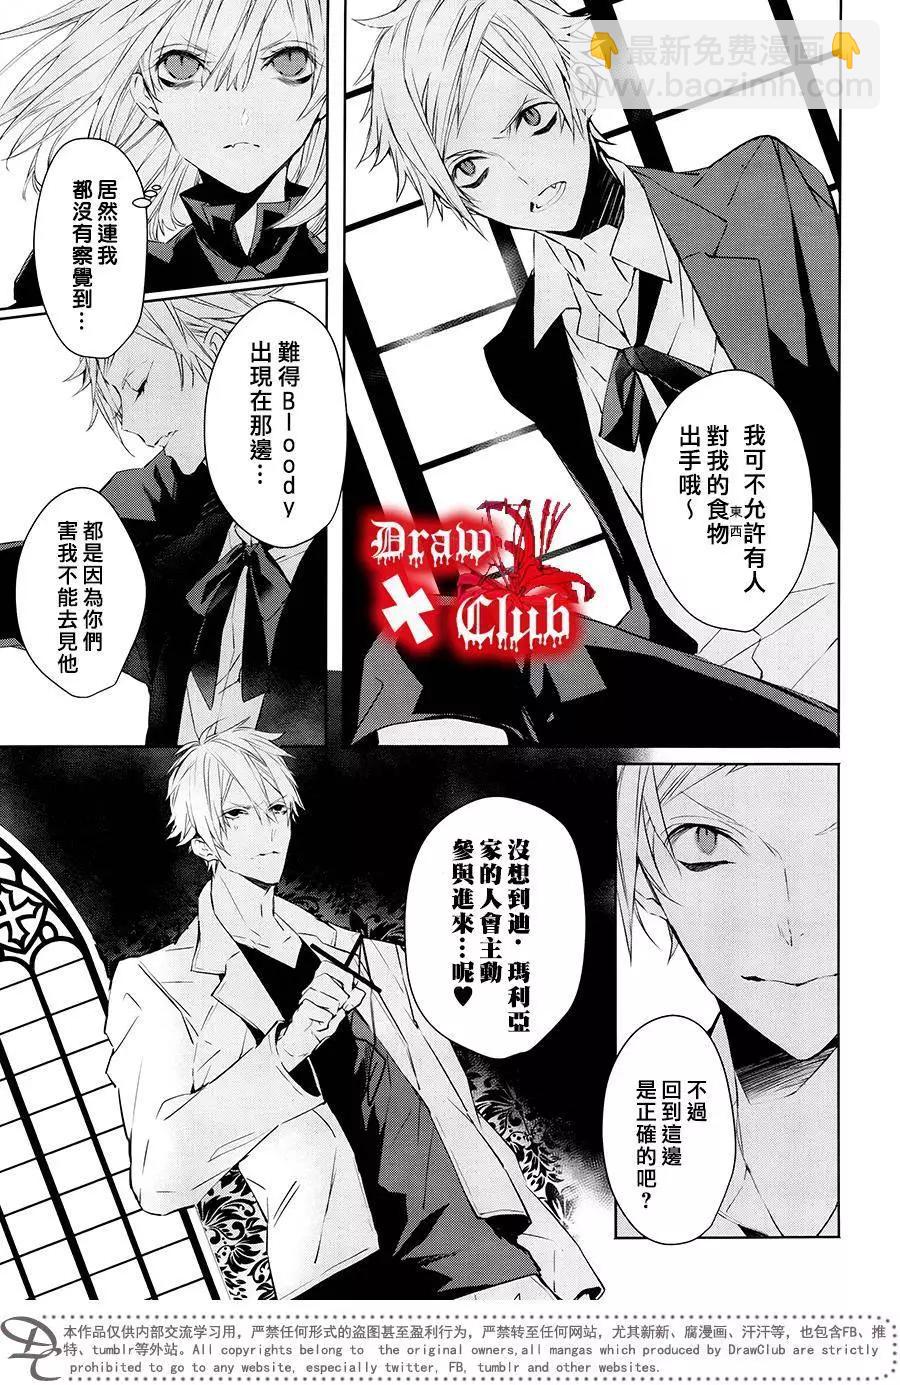 Bloody Mary - 第32回 - 5